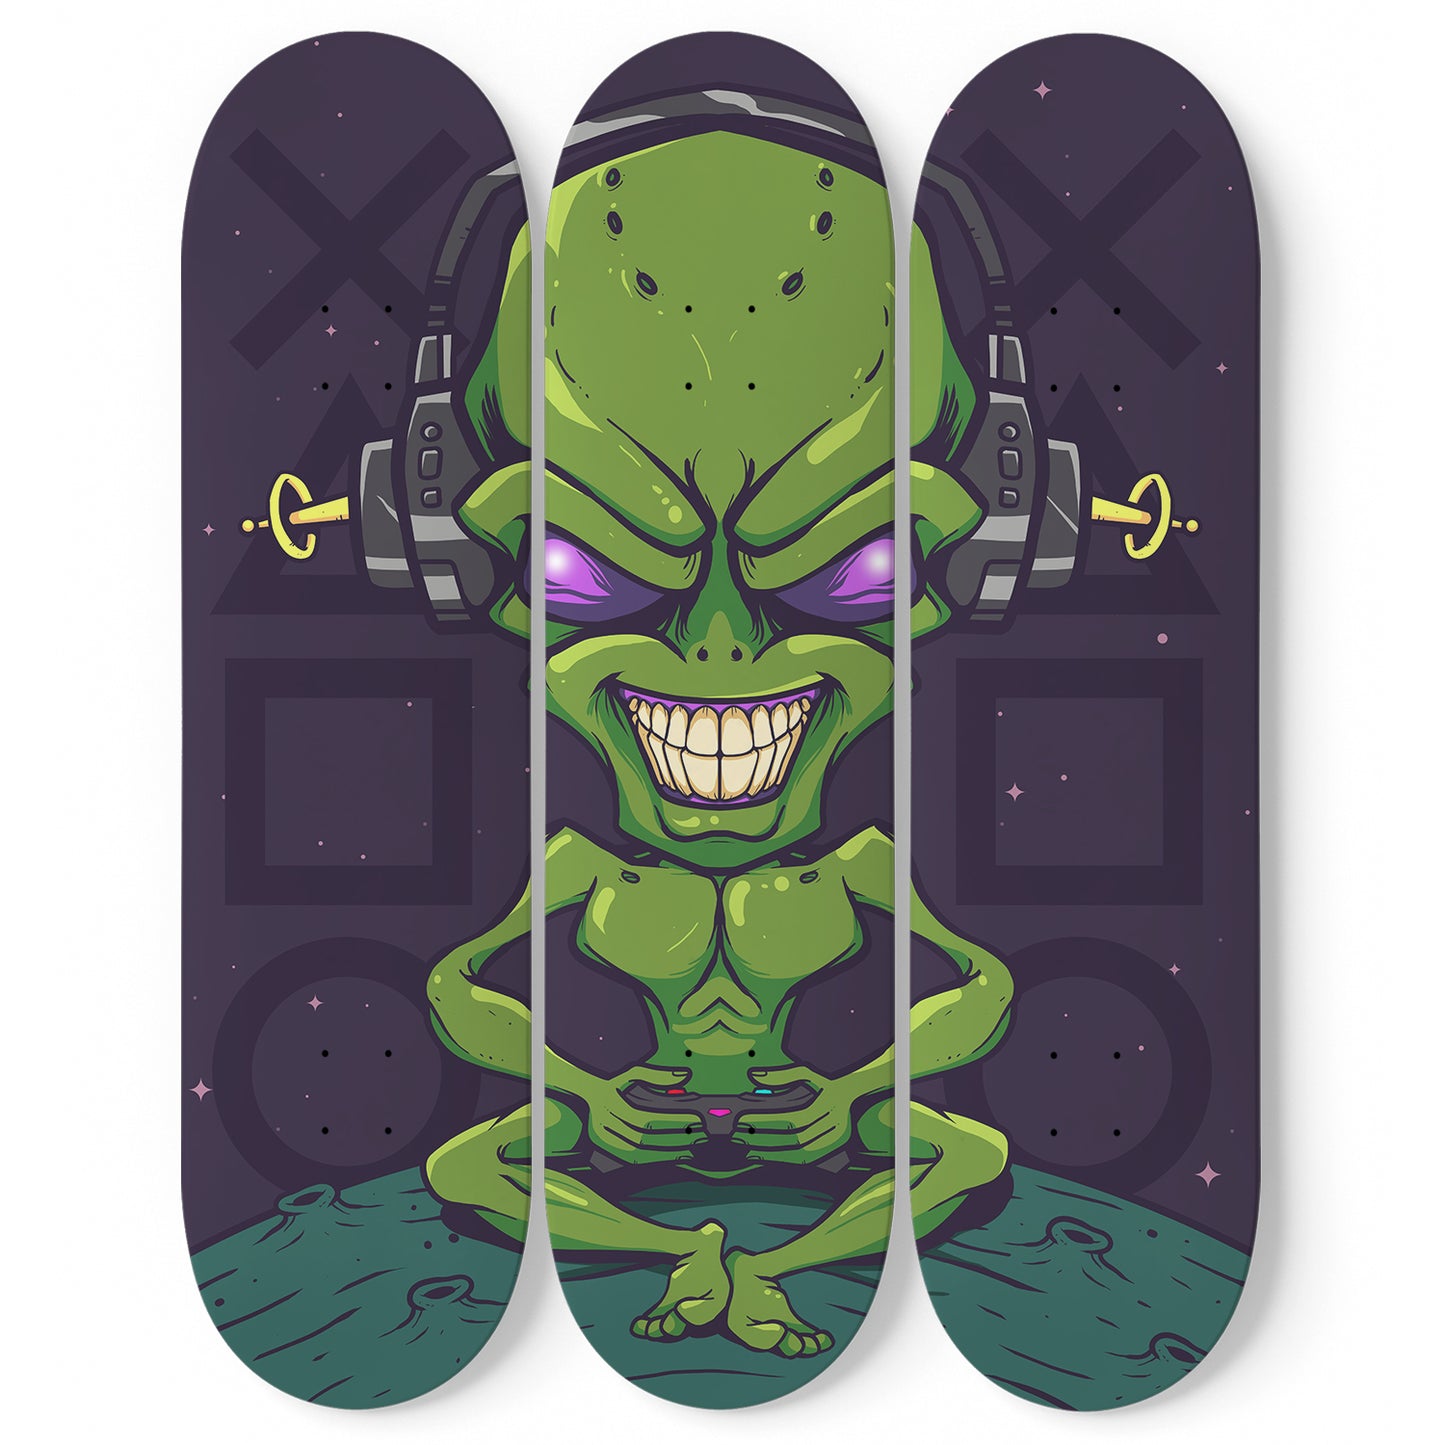 Galaxy Gaming 3 Deck Skateboard Wall Art: Level Up Your Space